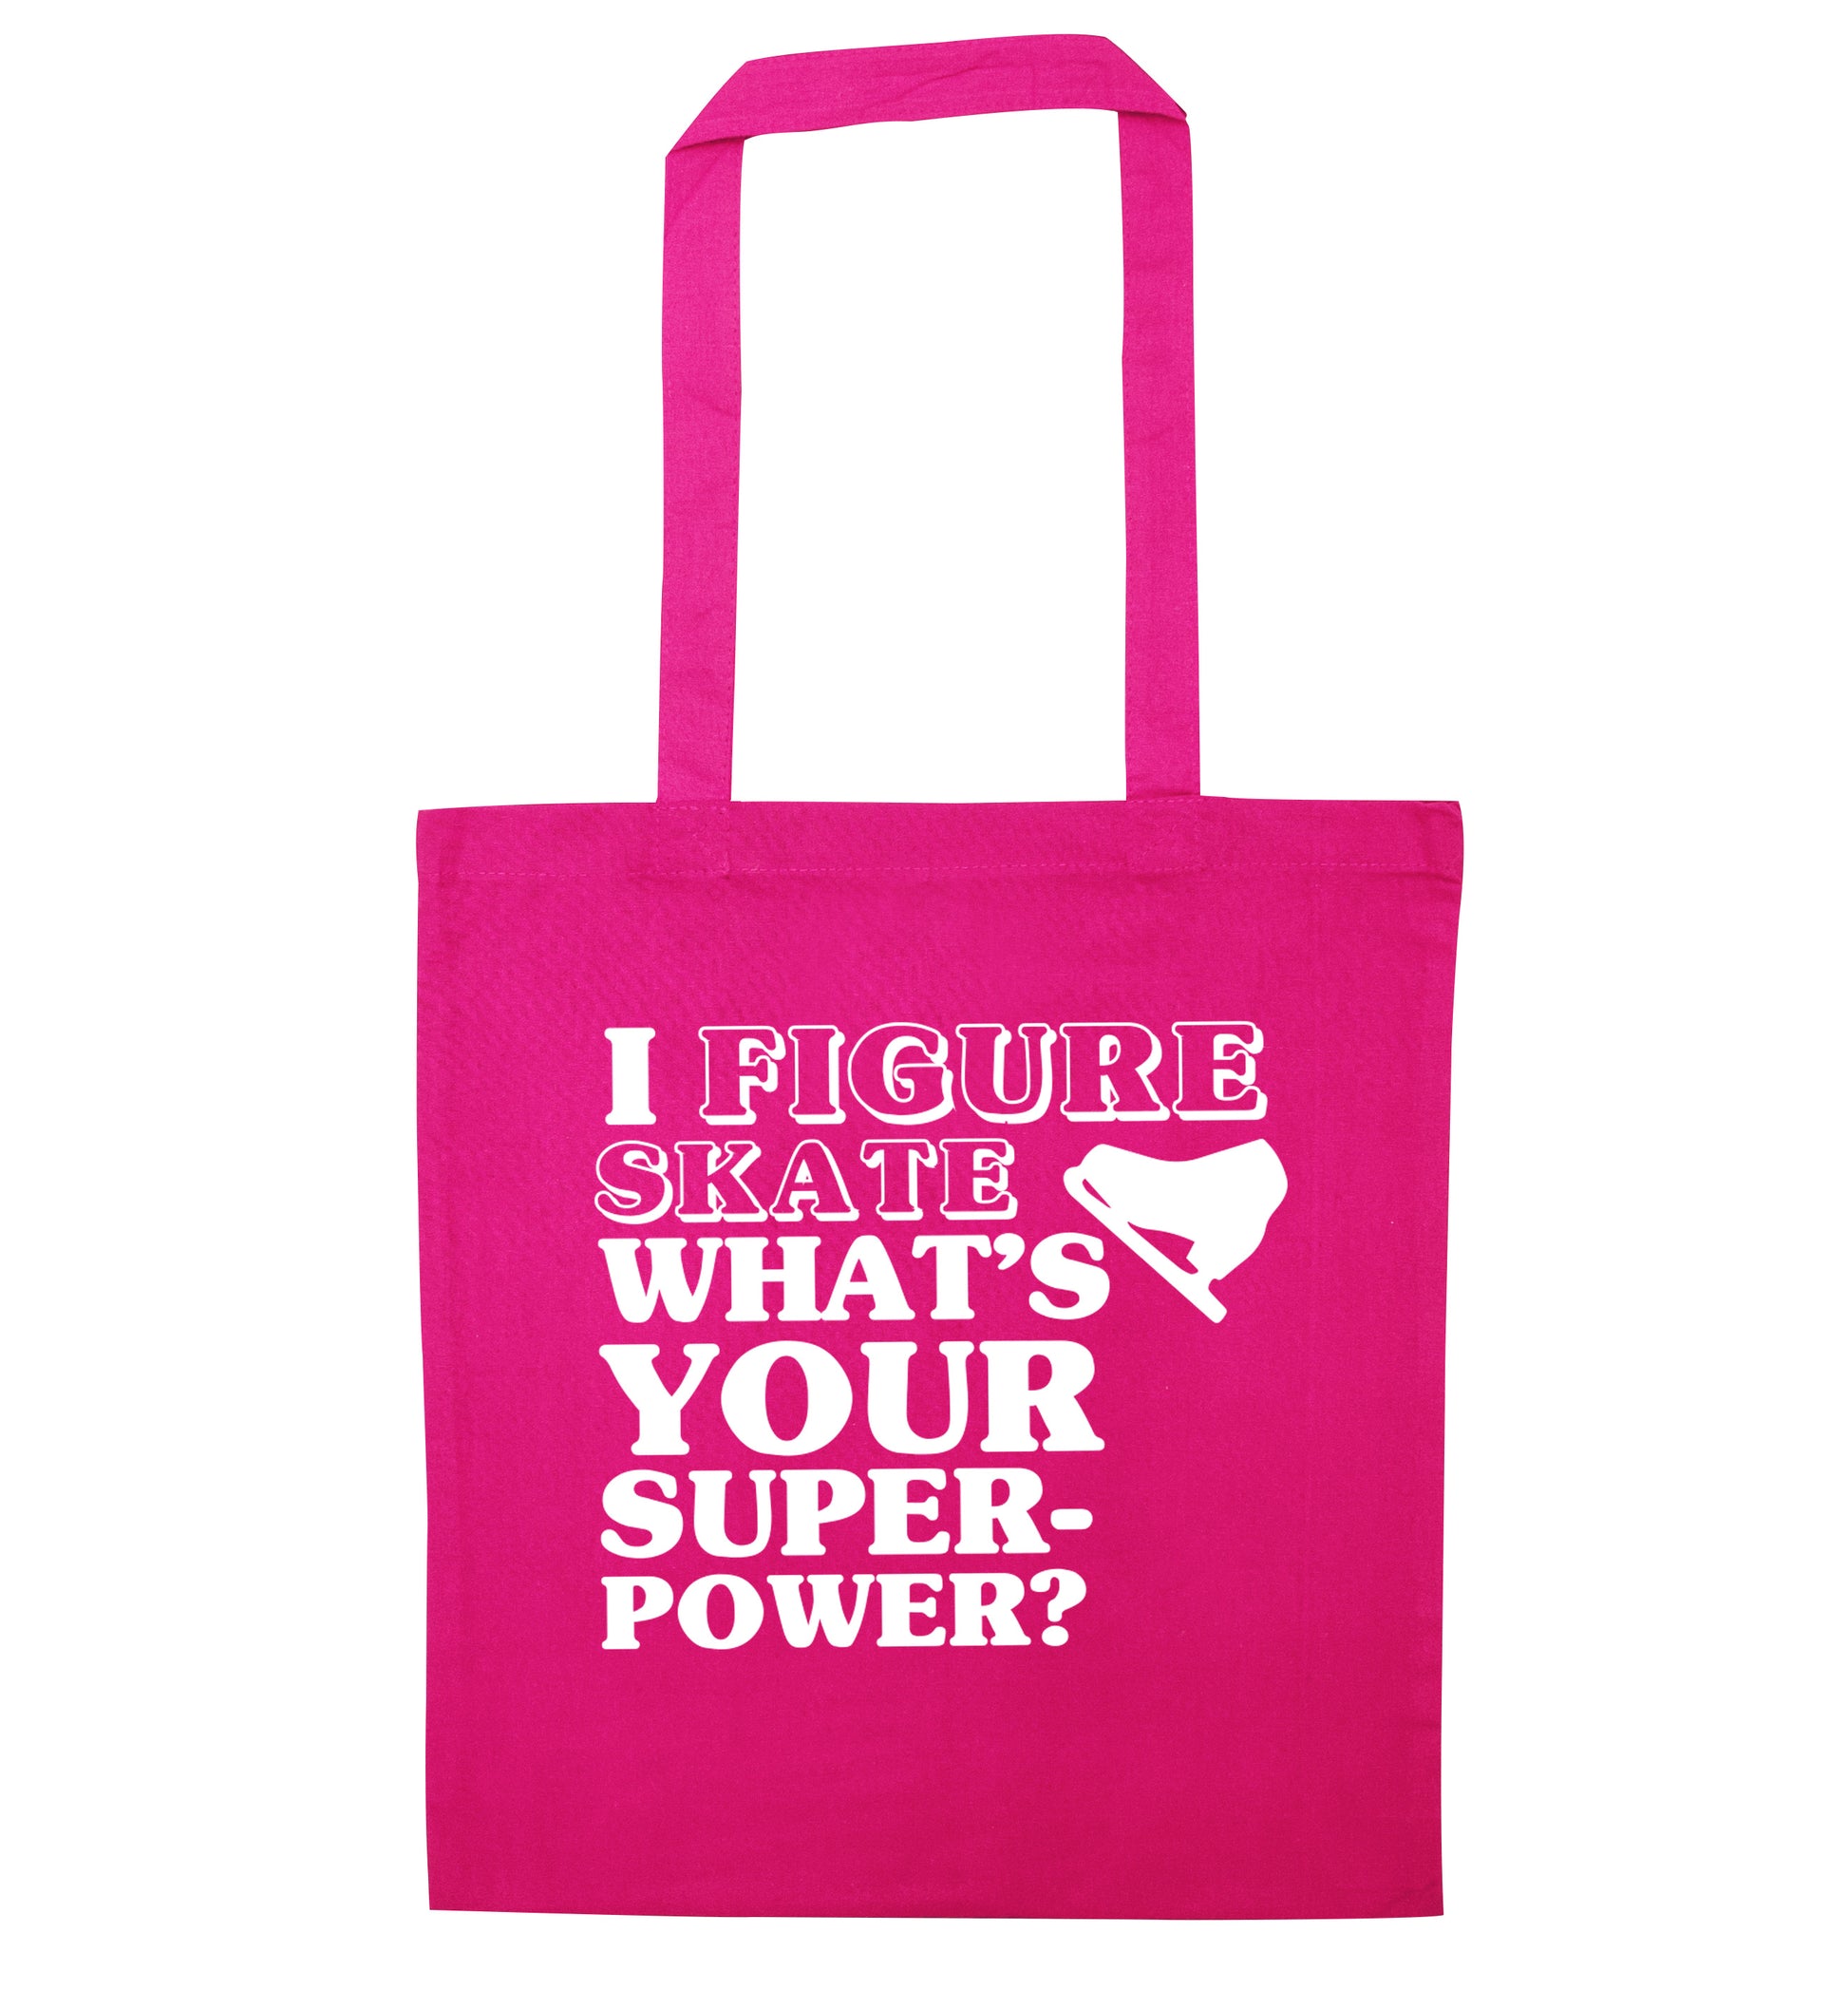 I figure skate what's your superpower? pink tote bag